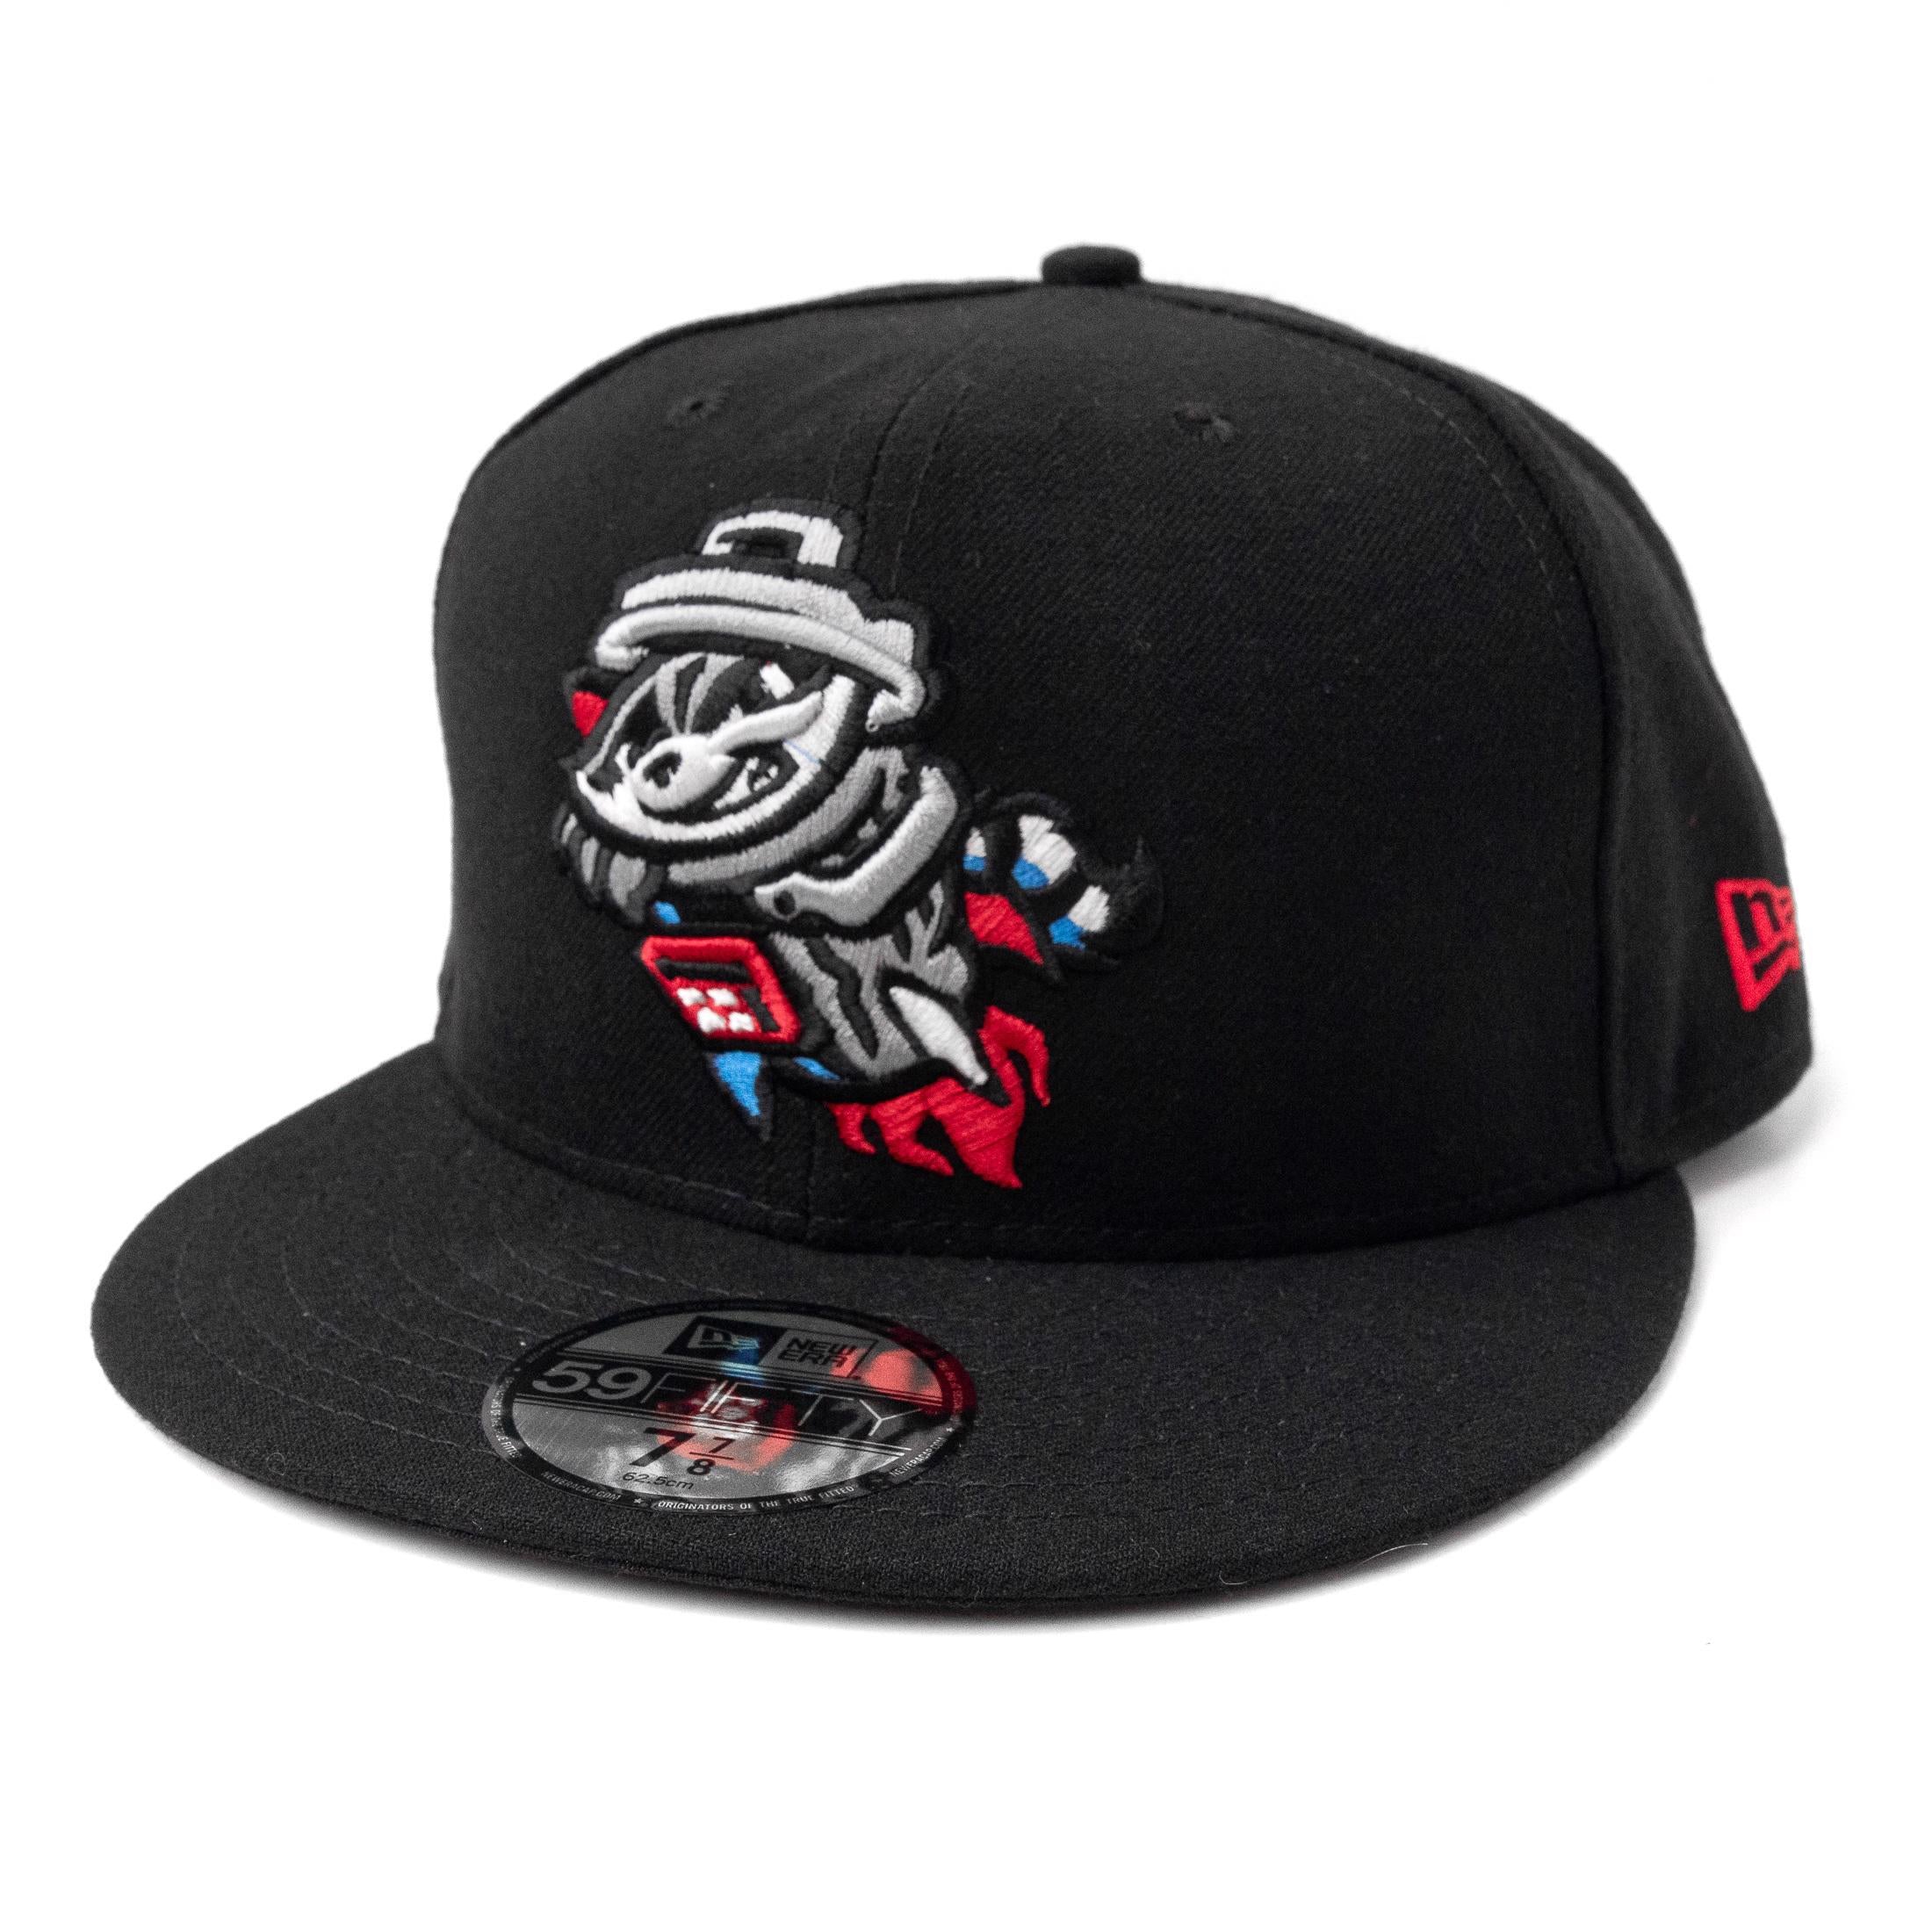 Tampa Smokers Hometown Collection New Era 59FIFTY Black Fitted Cap Black / 7 1/8